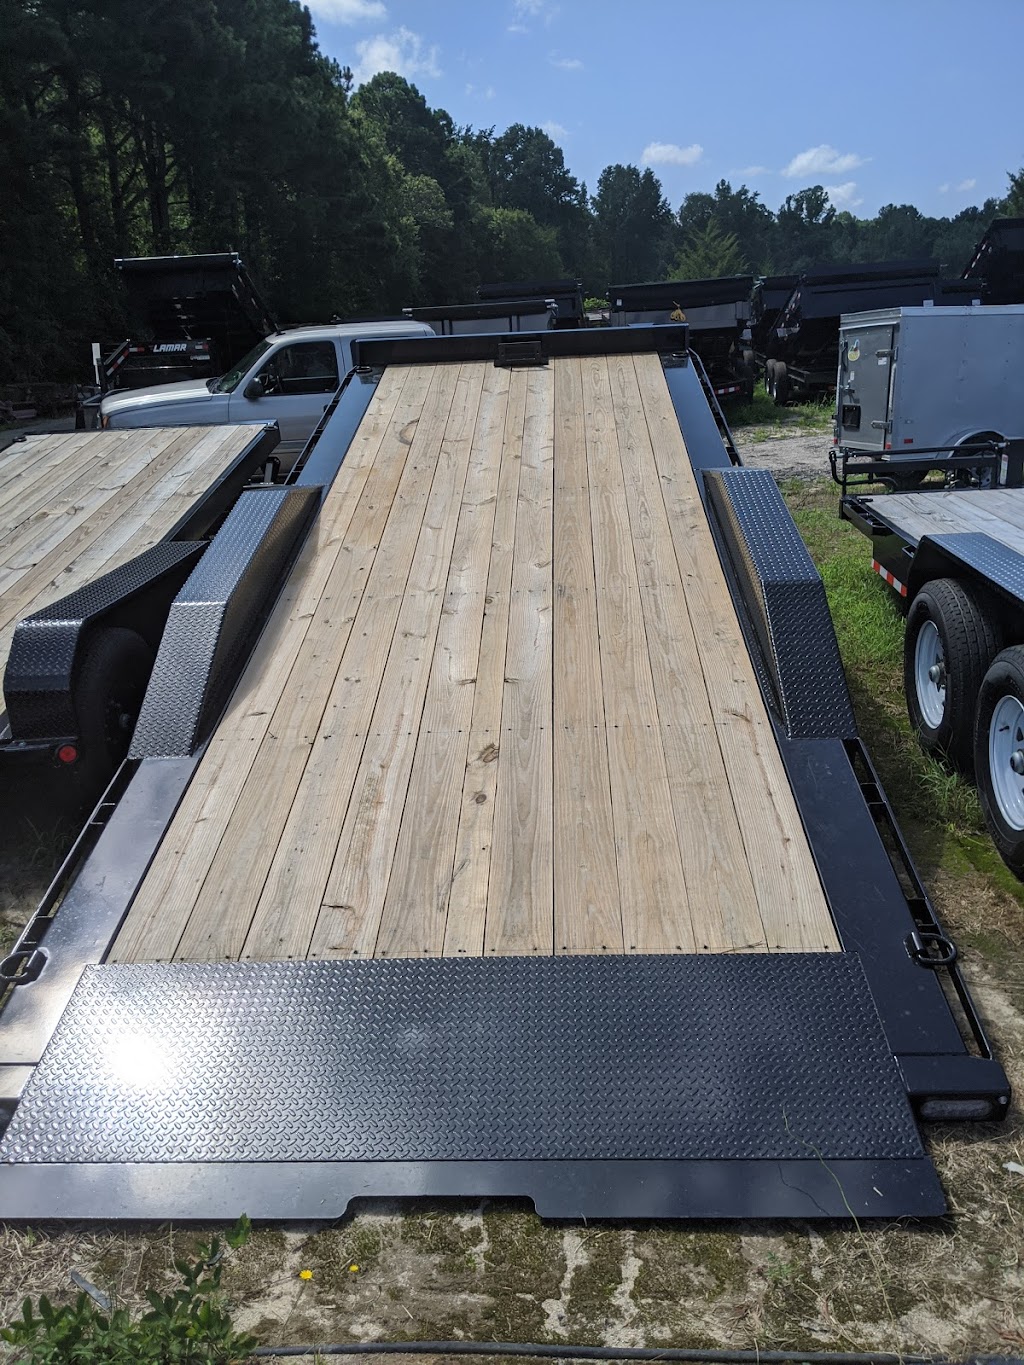 Rigsbee Trailers | Photo 10 of 10 | Address: 8200 Knightdale Blvd, Knightdale, NC 27545, USA | Phone: (919) 625-0220